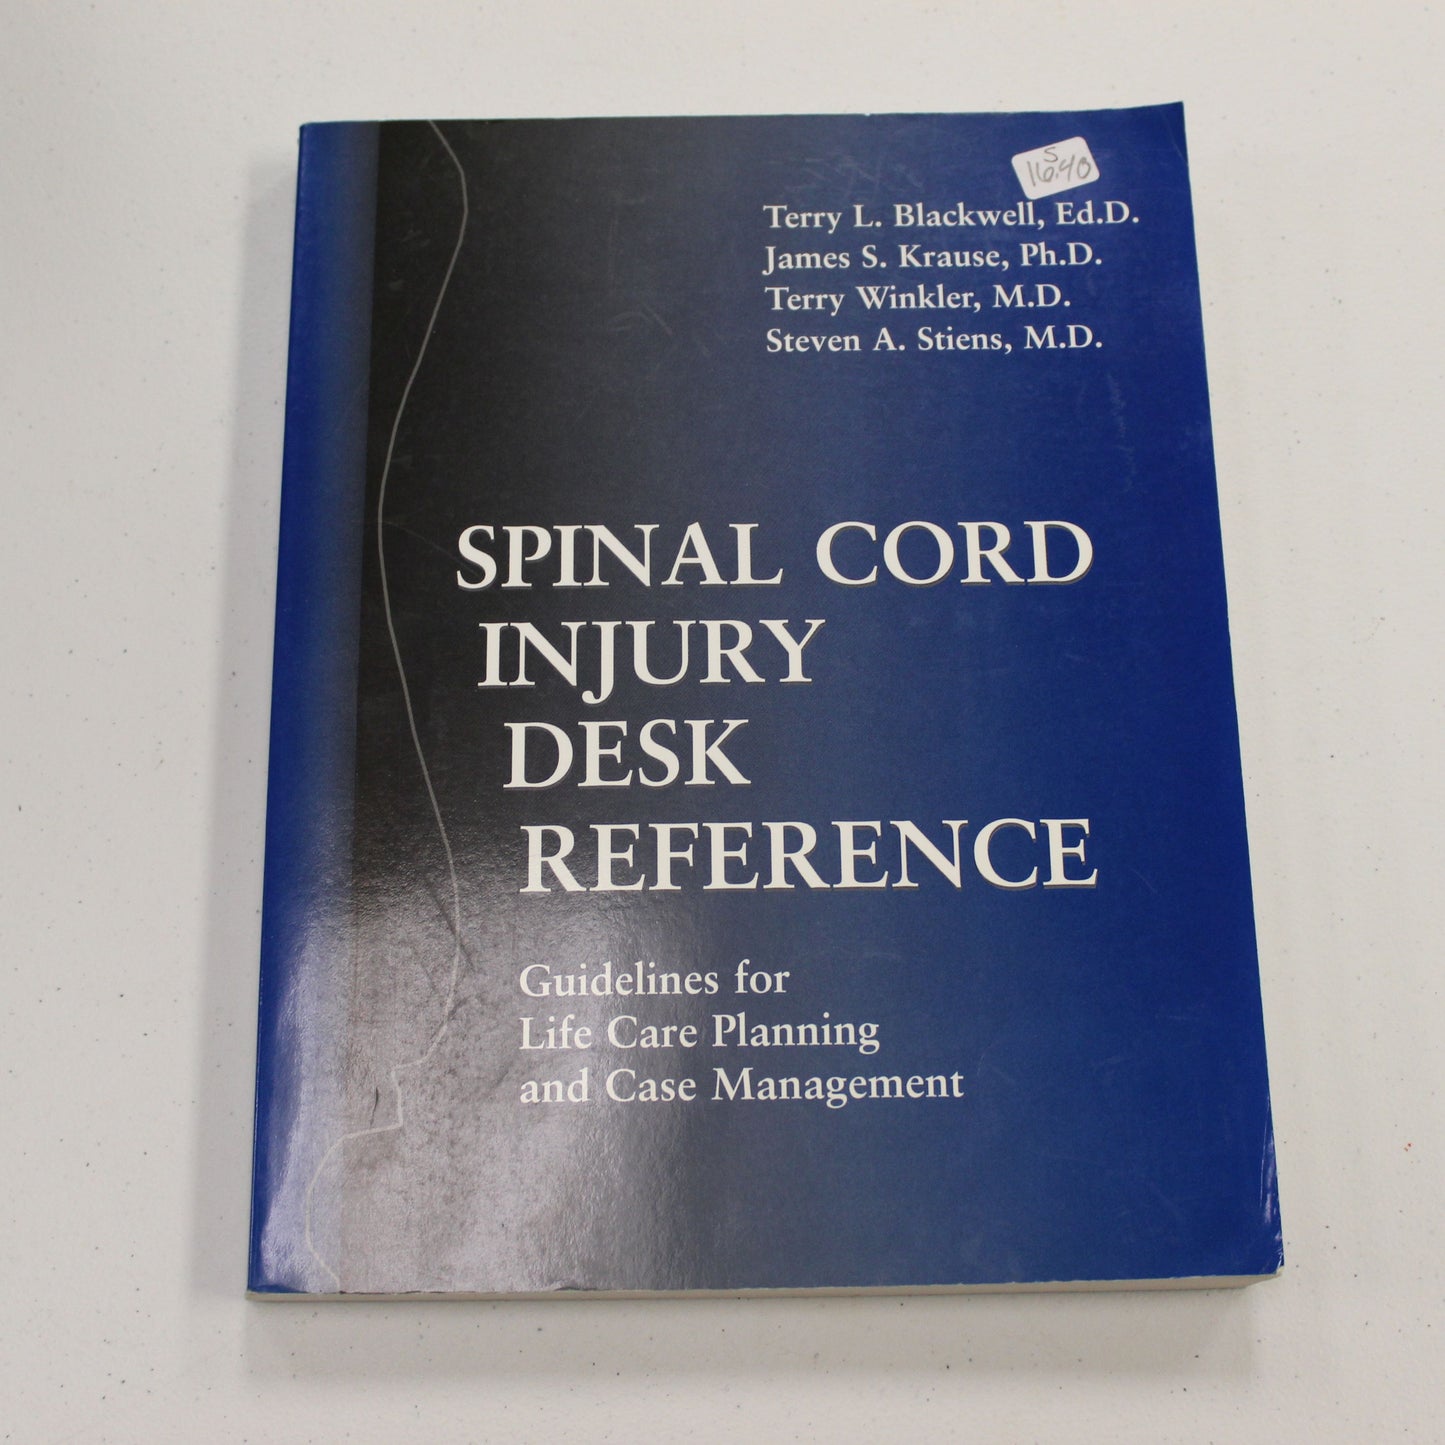 SPINAL CORD INJURY DESK REFERENCE